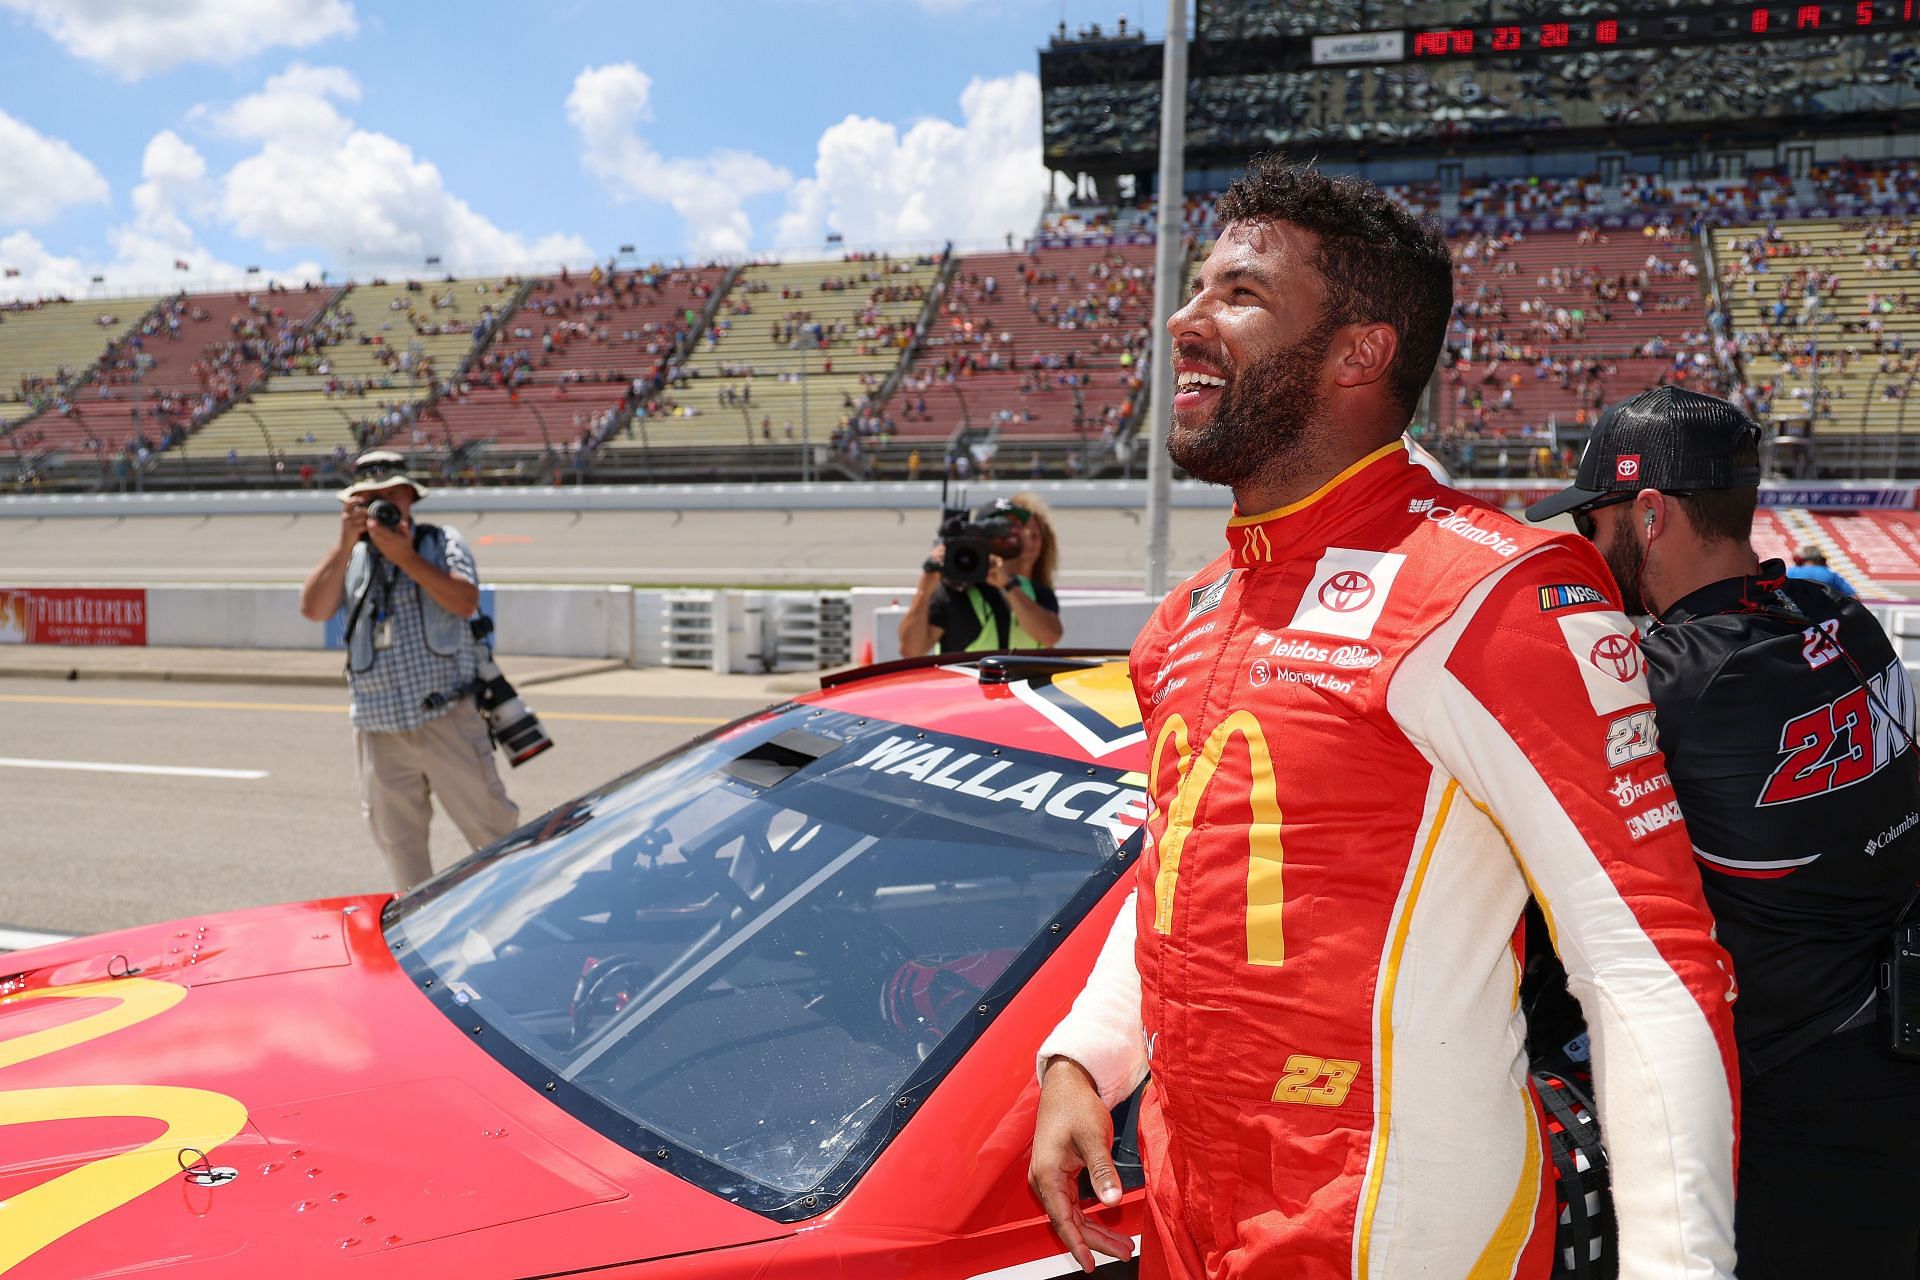 Bubba Wallace Jr. celebrates after winning the pole award for the 2022 NASCAR Cup Series FireKeepers Casino 400 at Michigan International Speedway in Brooklyn, Michigan (Photo by Mike Mulholland/Getty Images)